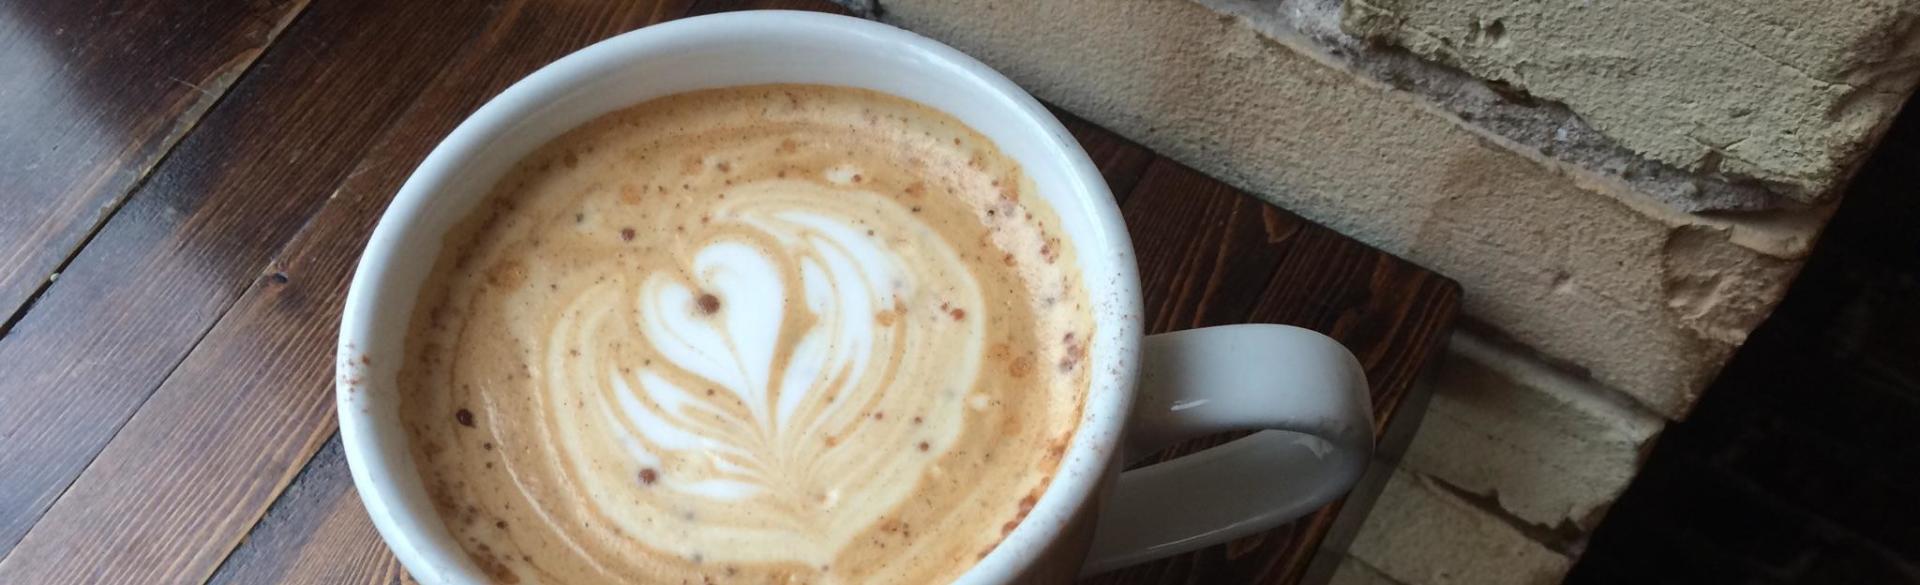 The Lantern Coffee Bar and Lounge's coffee creations are works of art.